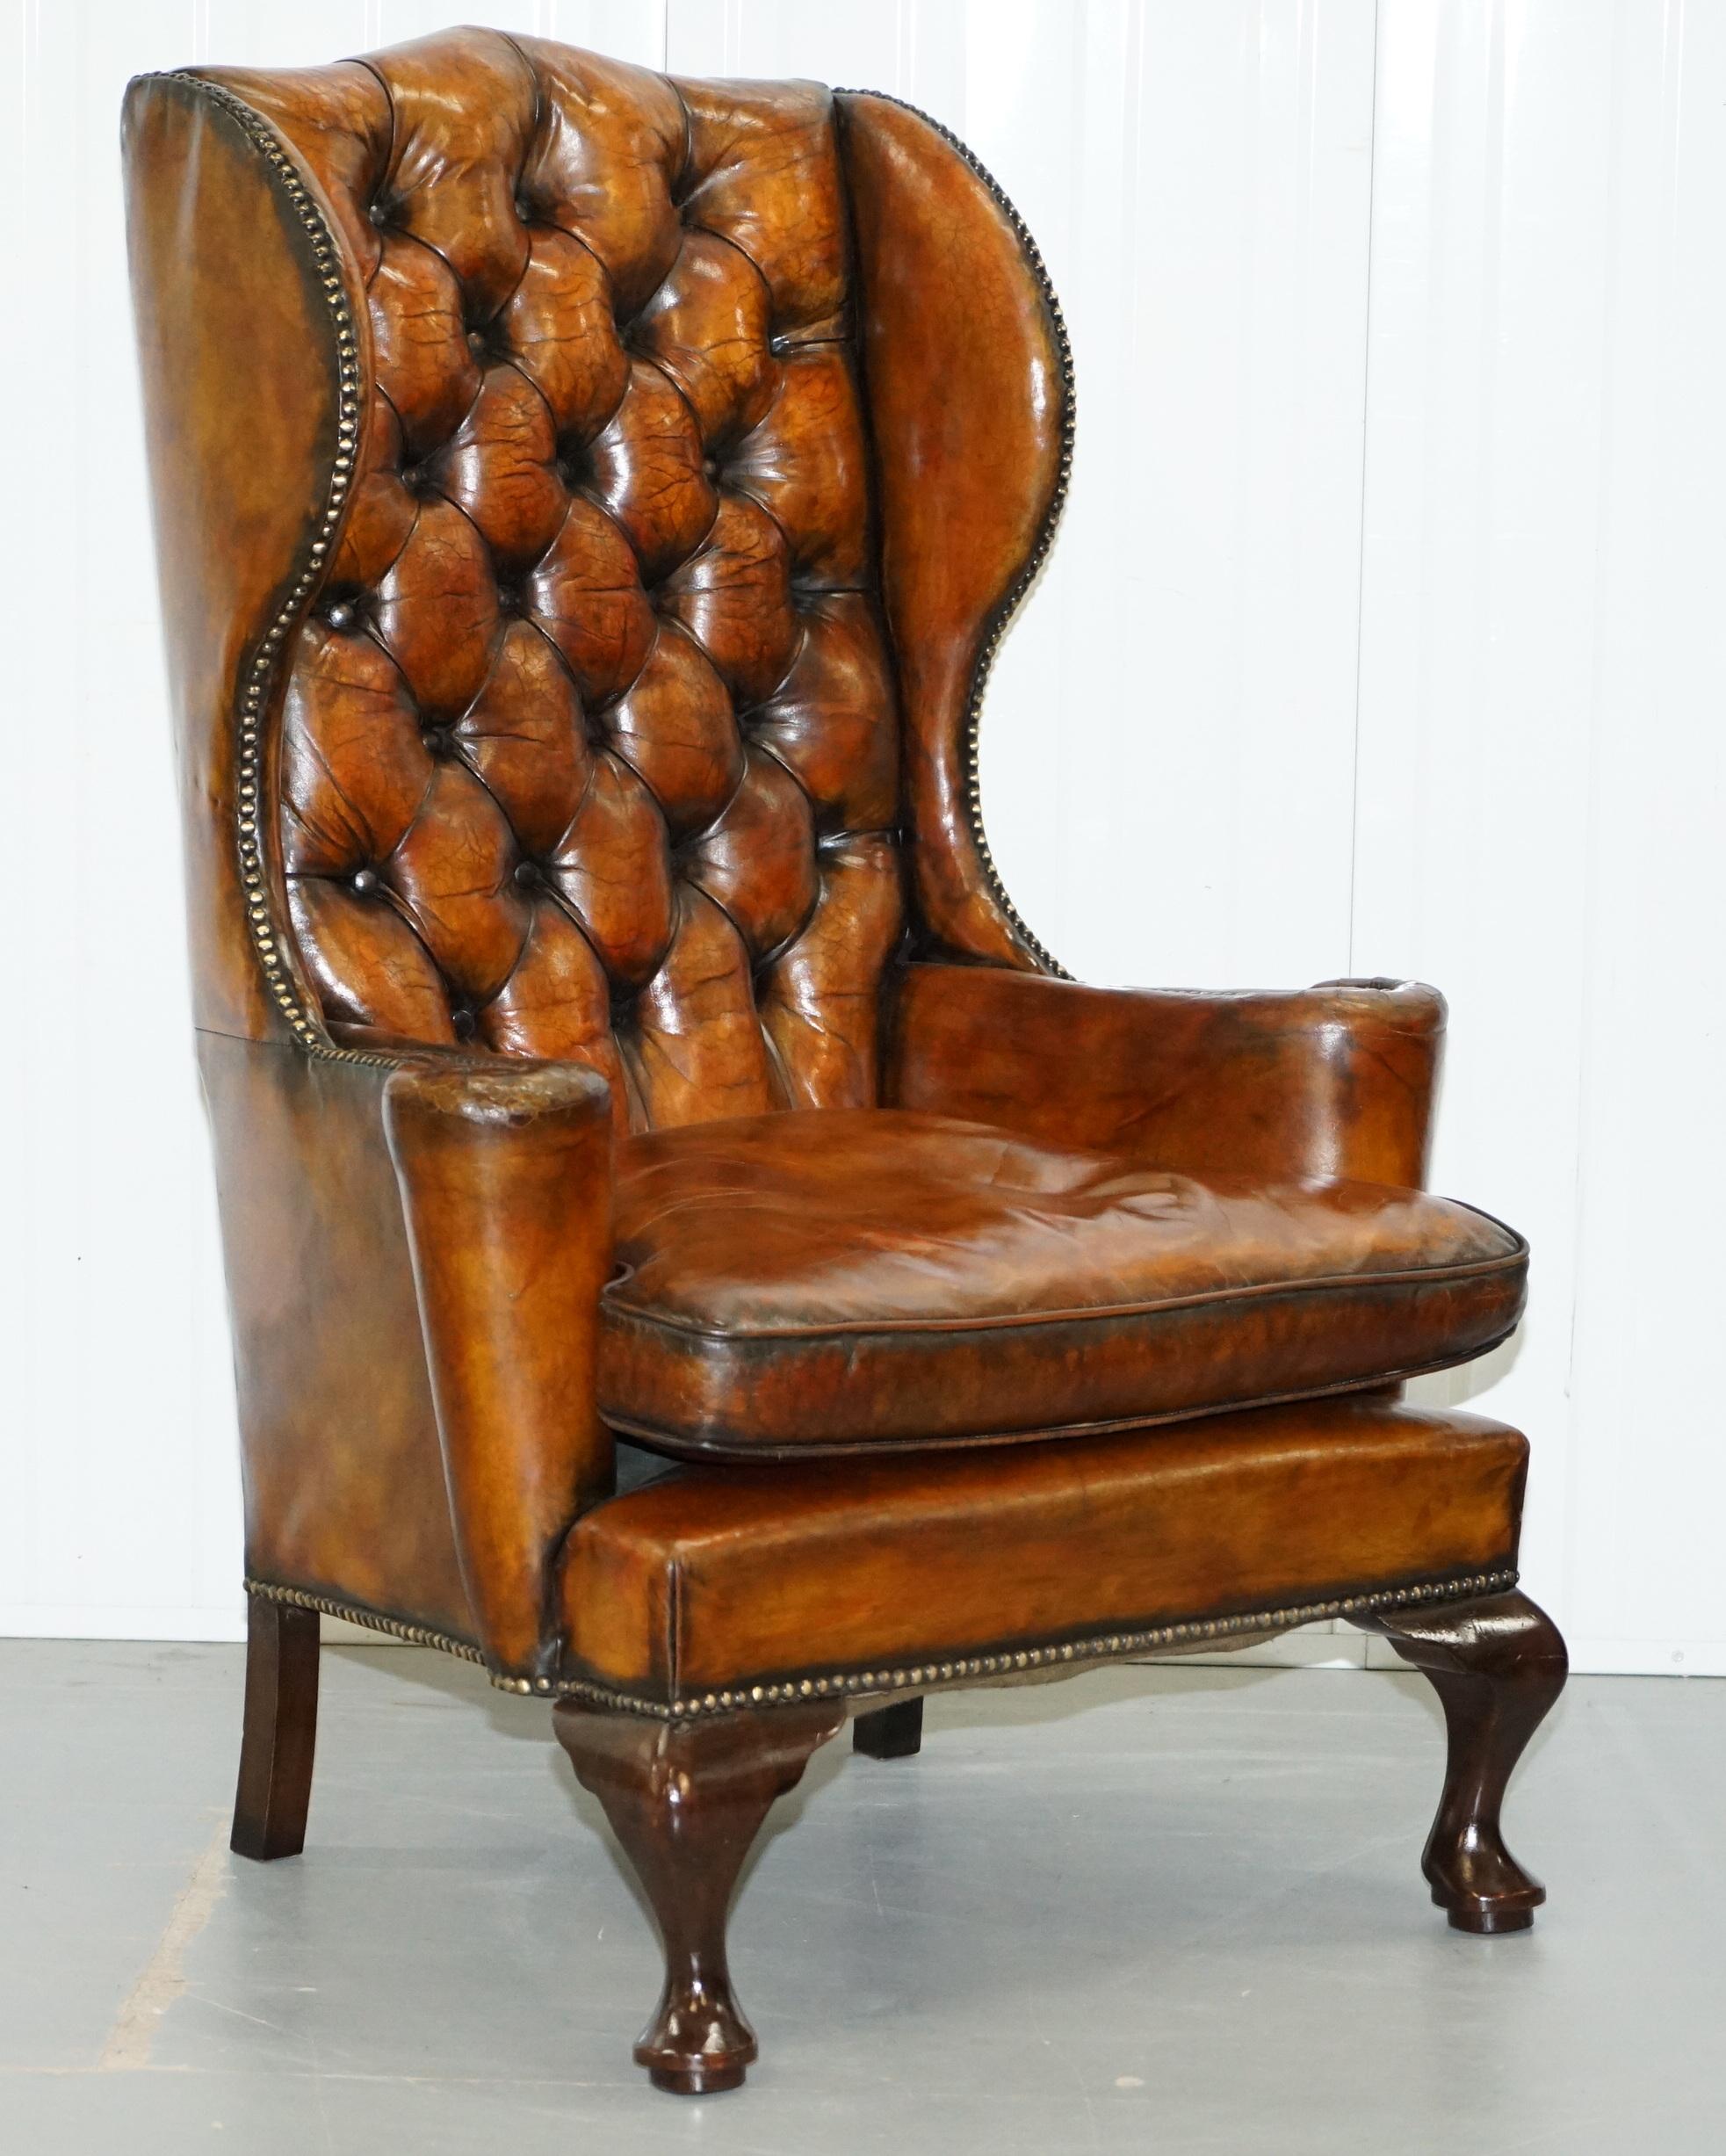 We are delighted to offer for sale this stunning pair of fully restored Thomas Chippendale style Victorian wingback armchairs in hand dyed whisky brown leather

If you’re looking for a very rare model pair of wingback armchairs that scream English